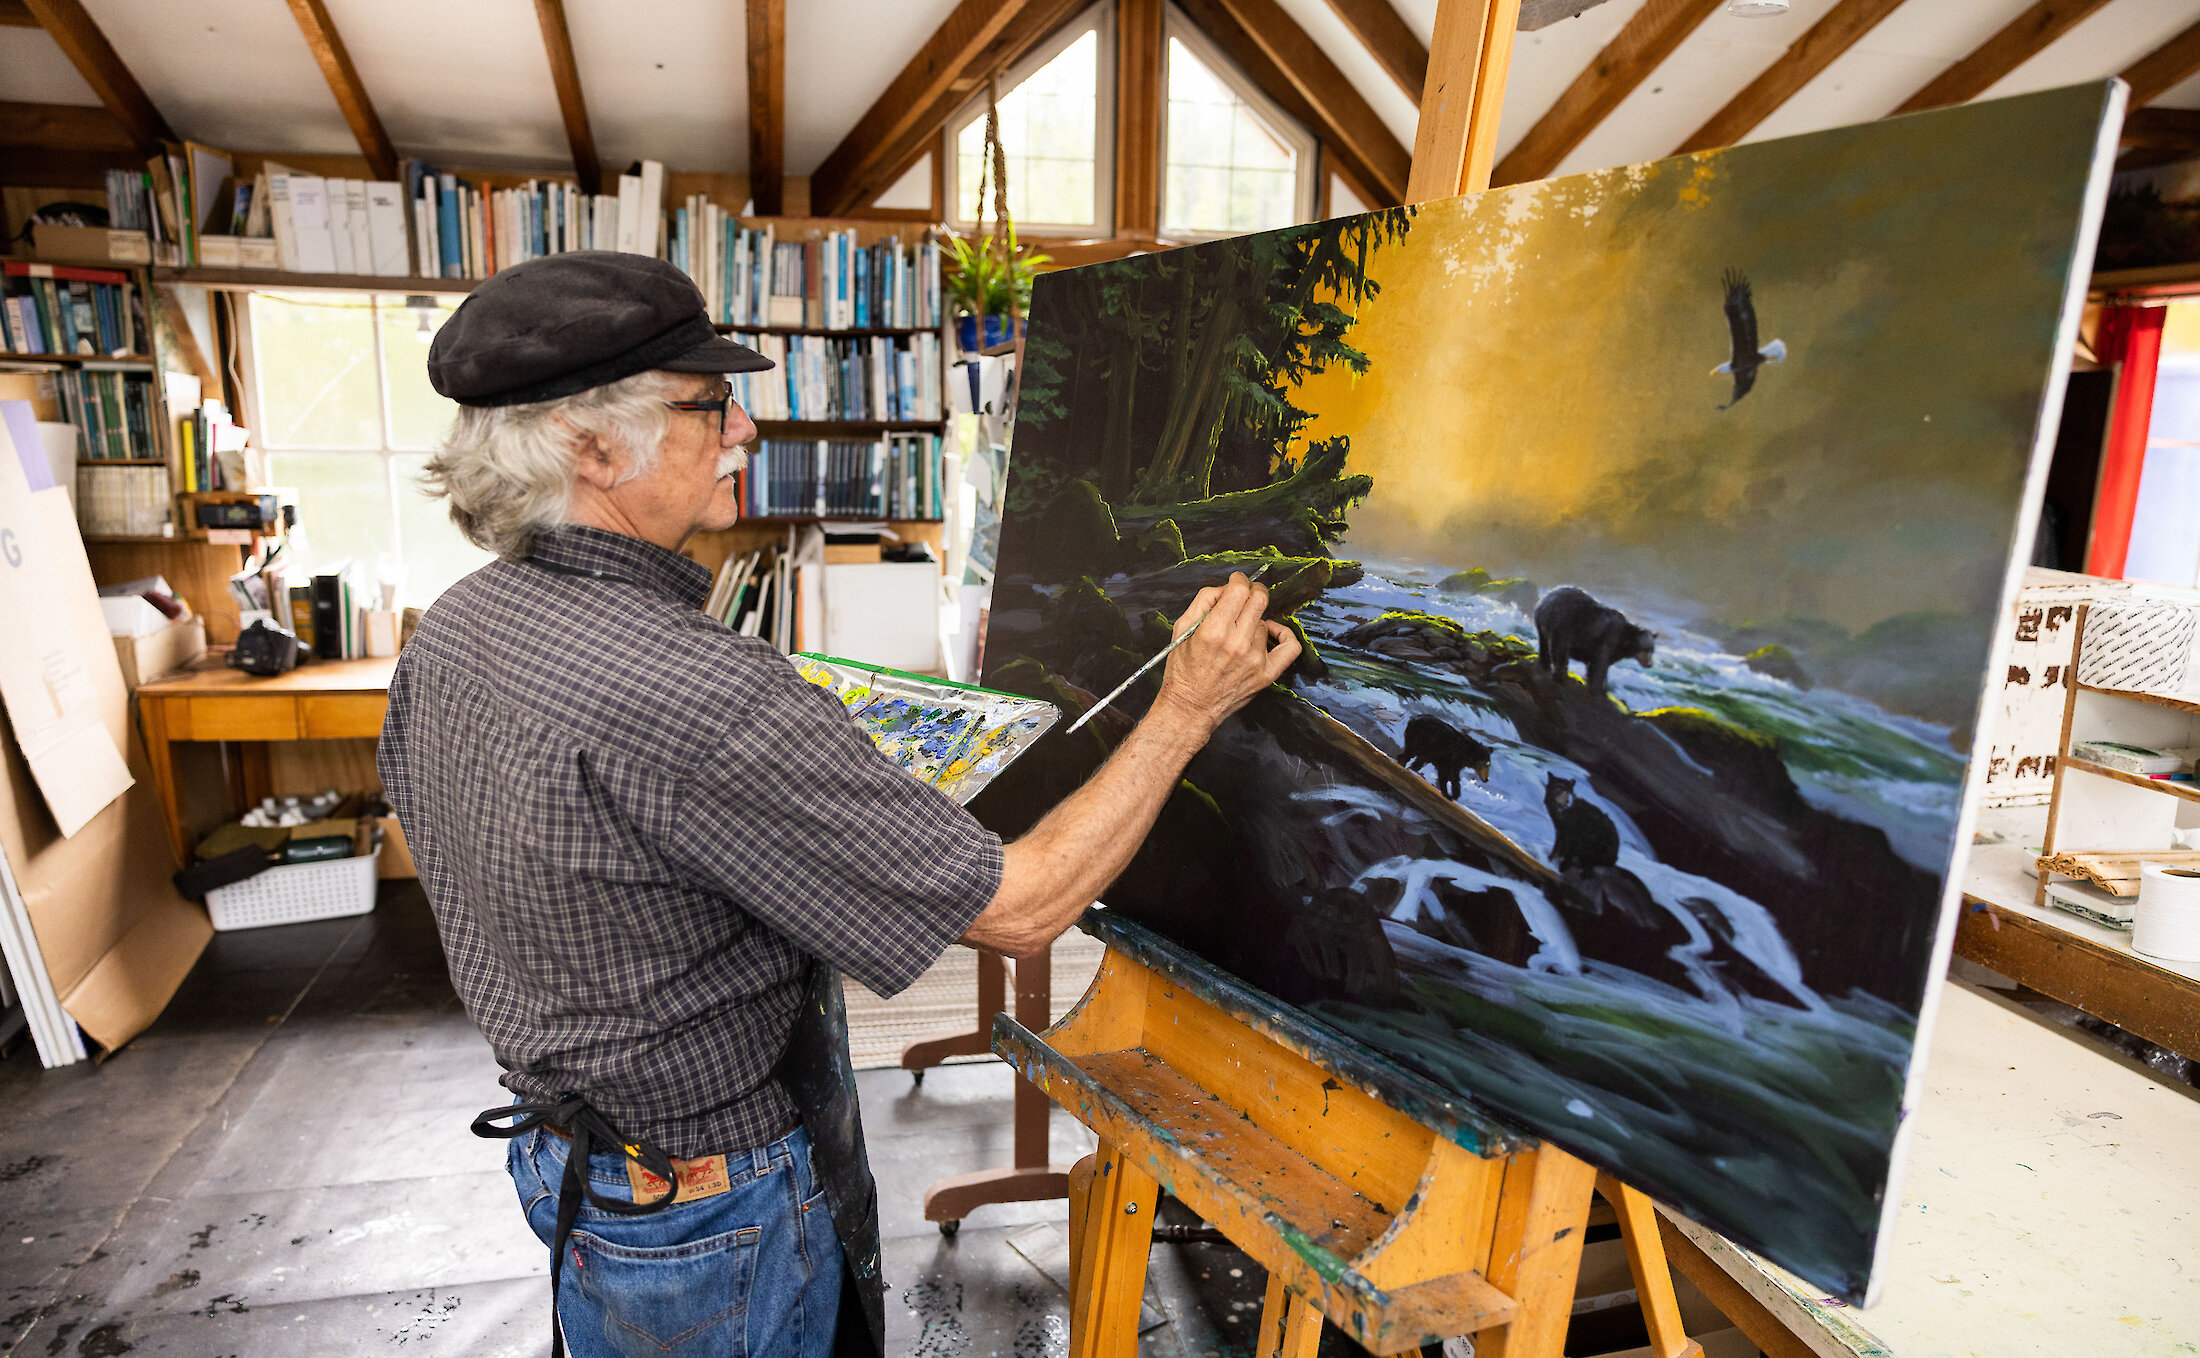 Artist Mark Hobson wearing a hat and painting at an easel